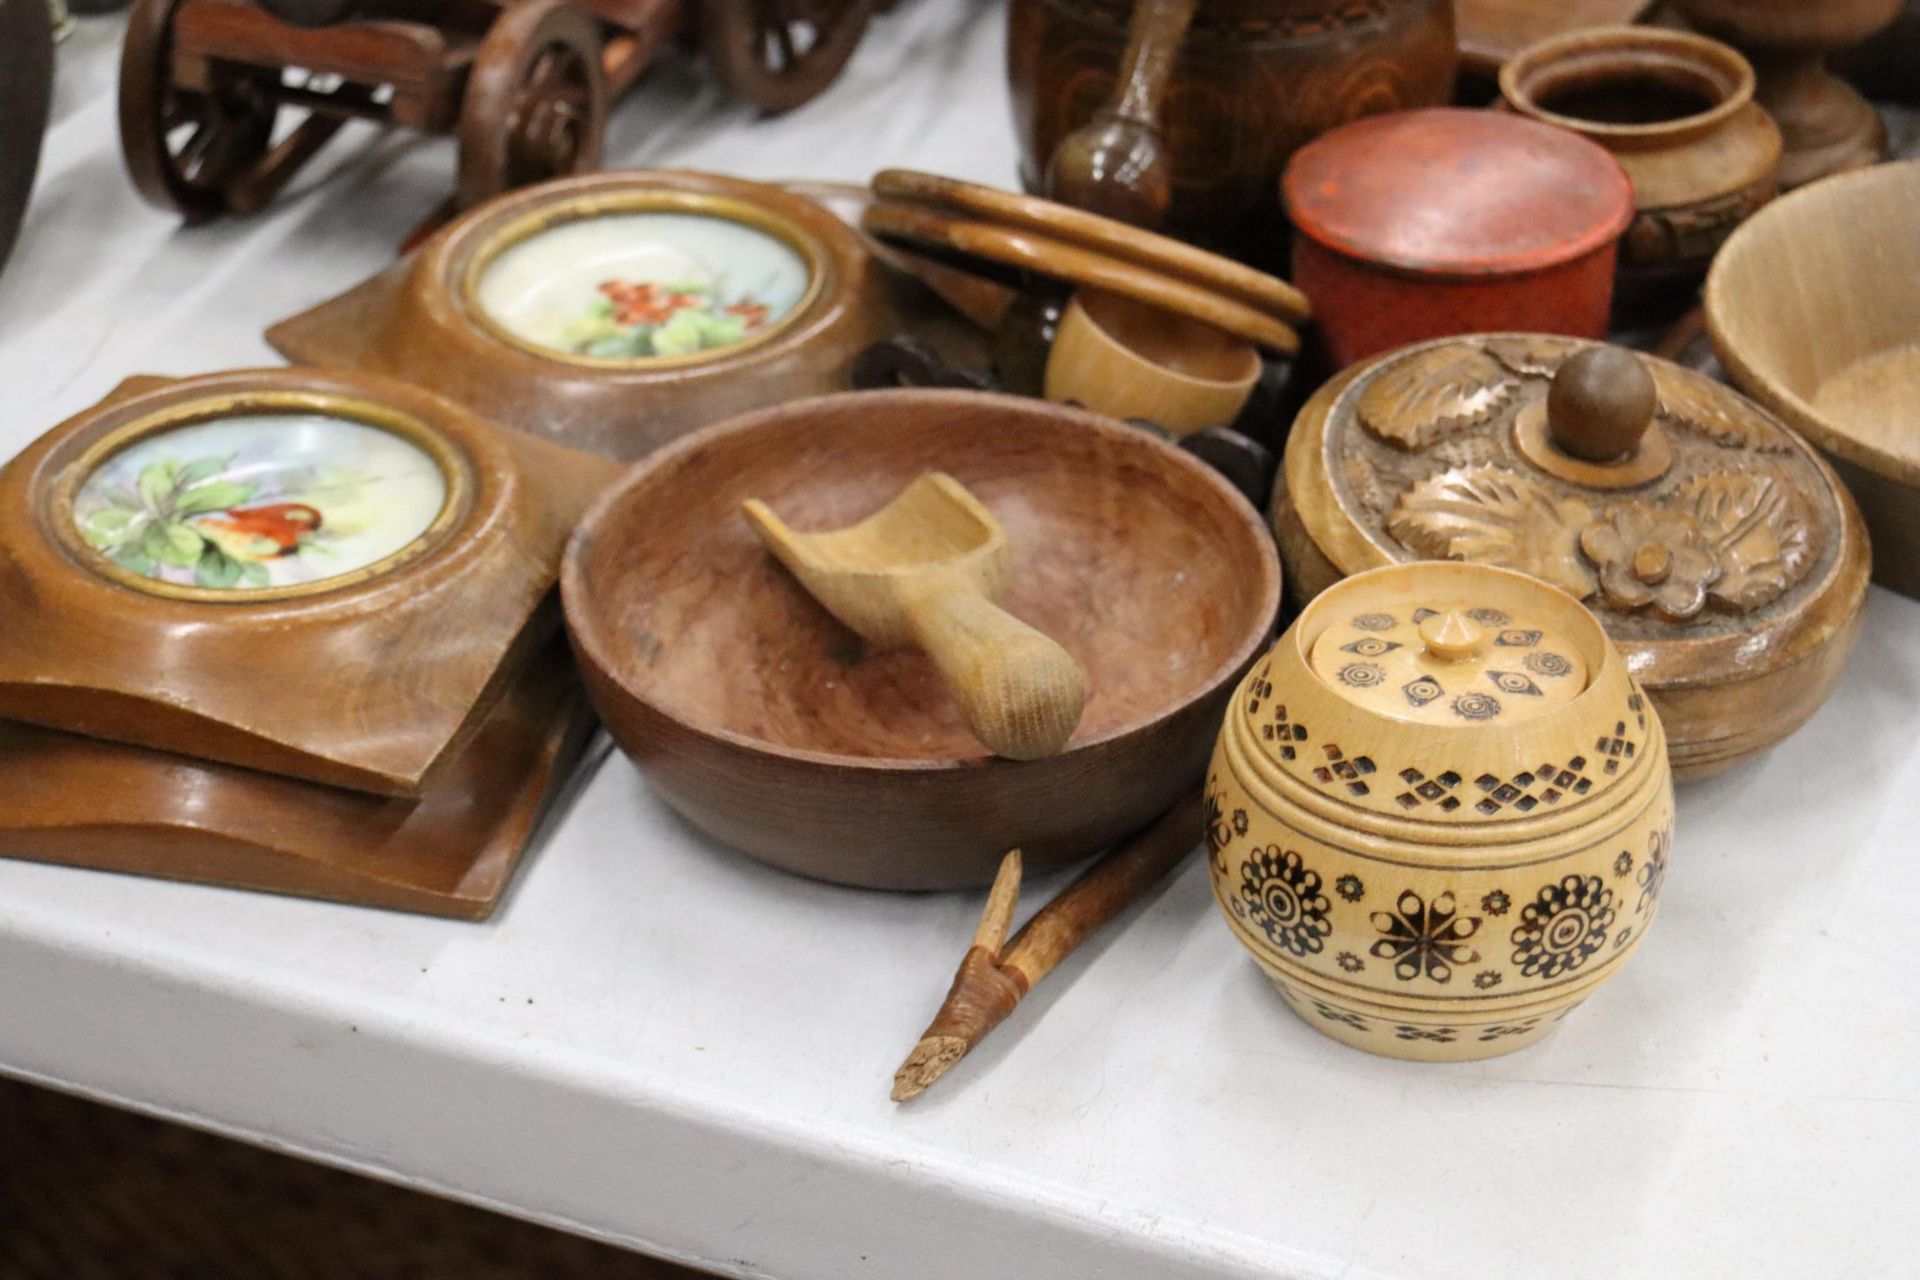 A LARGE QUANTITY OF TREEN ITEMS TO INCLUUDE BOWLS, TRINKET BOXES, FRAMED HANDPAINTED TILES, - Image 4 of 11